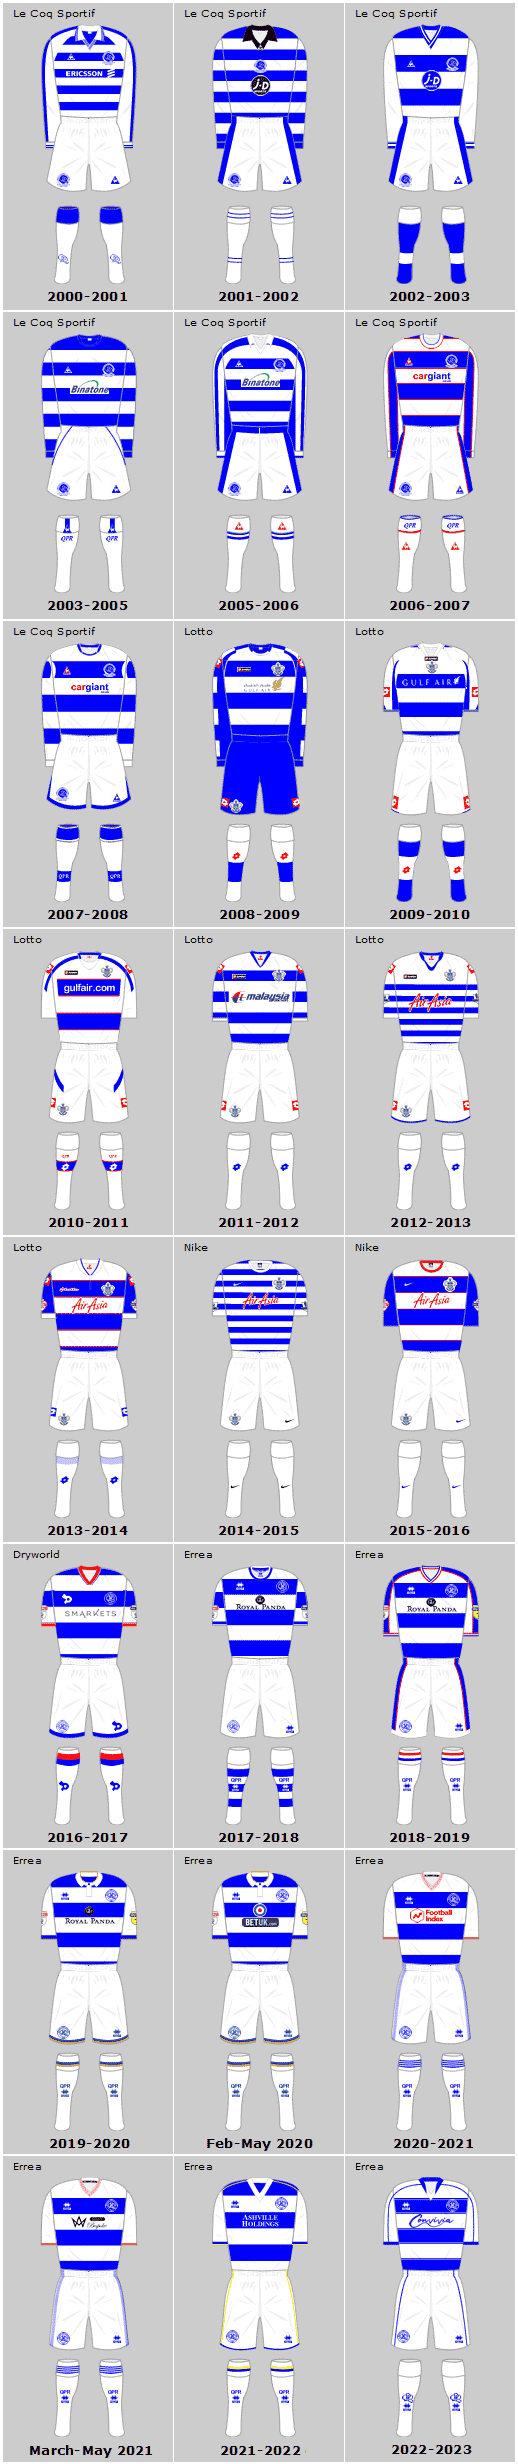 Queens Park Rangers 21st Century Home Playing Kits